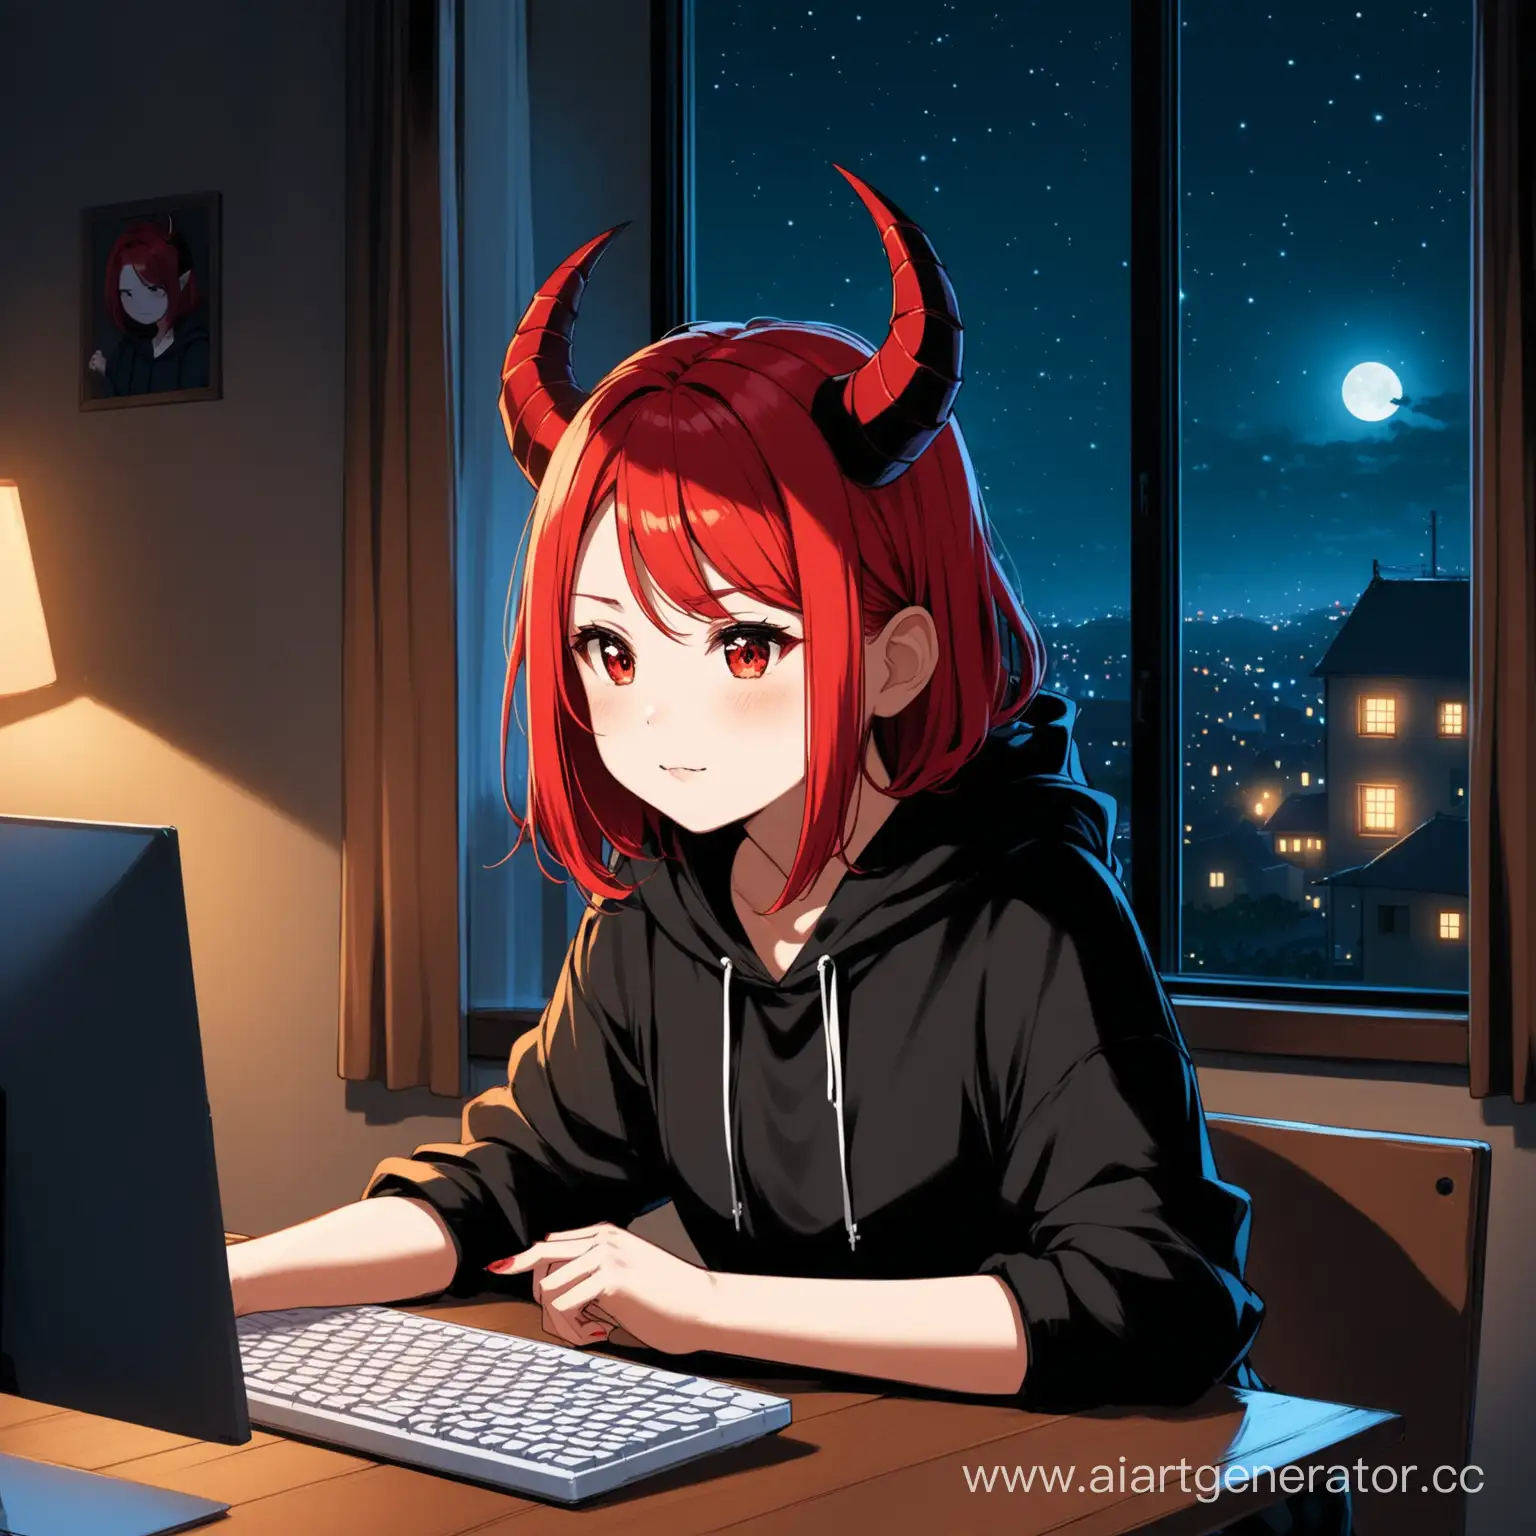 RedHaired-Girl-with-Devil-Horns-Enjoying-Nighttime-Computer-Play